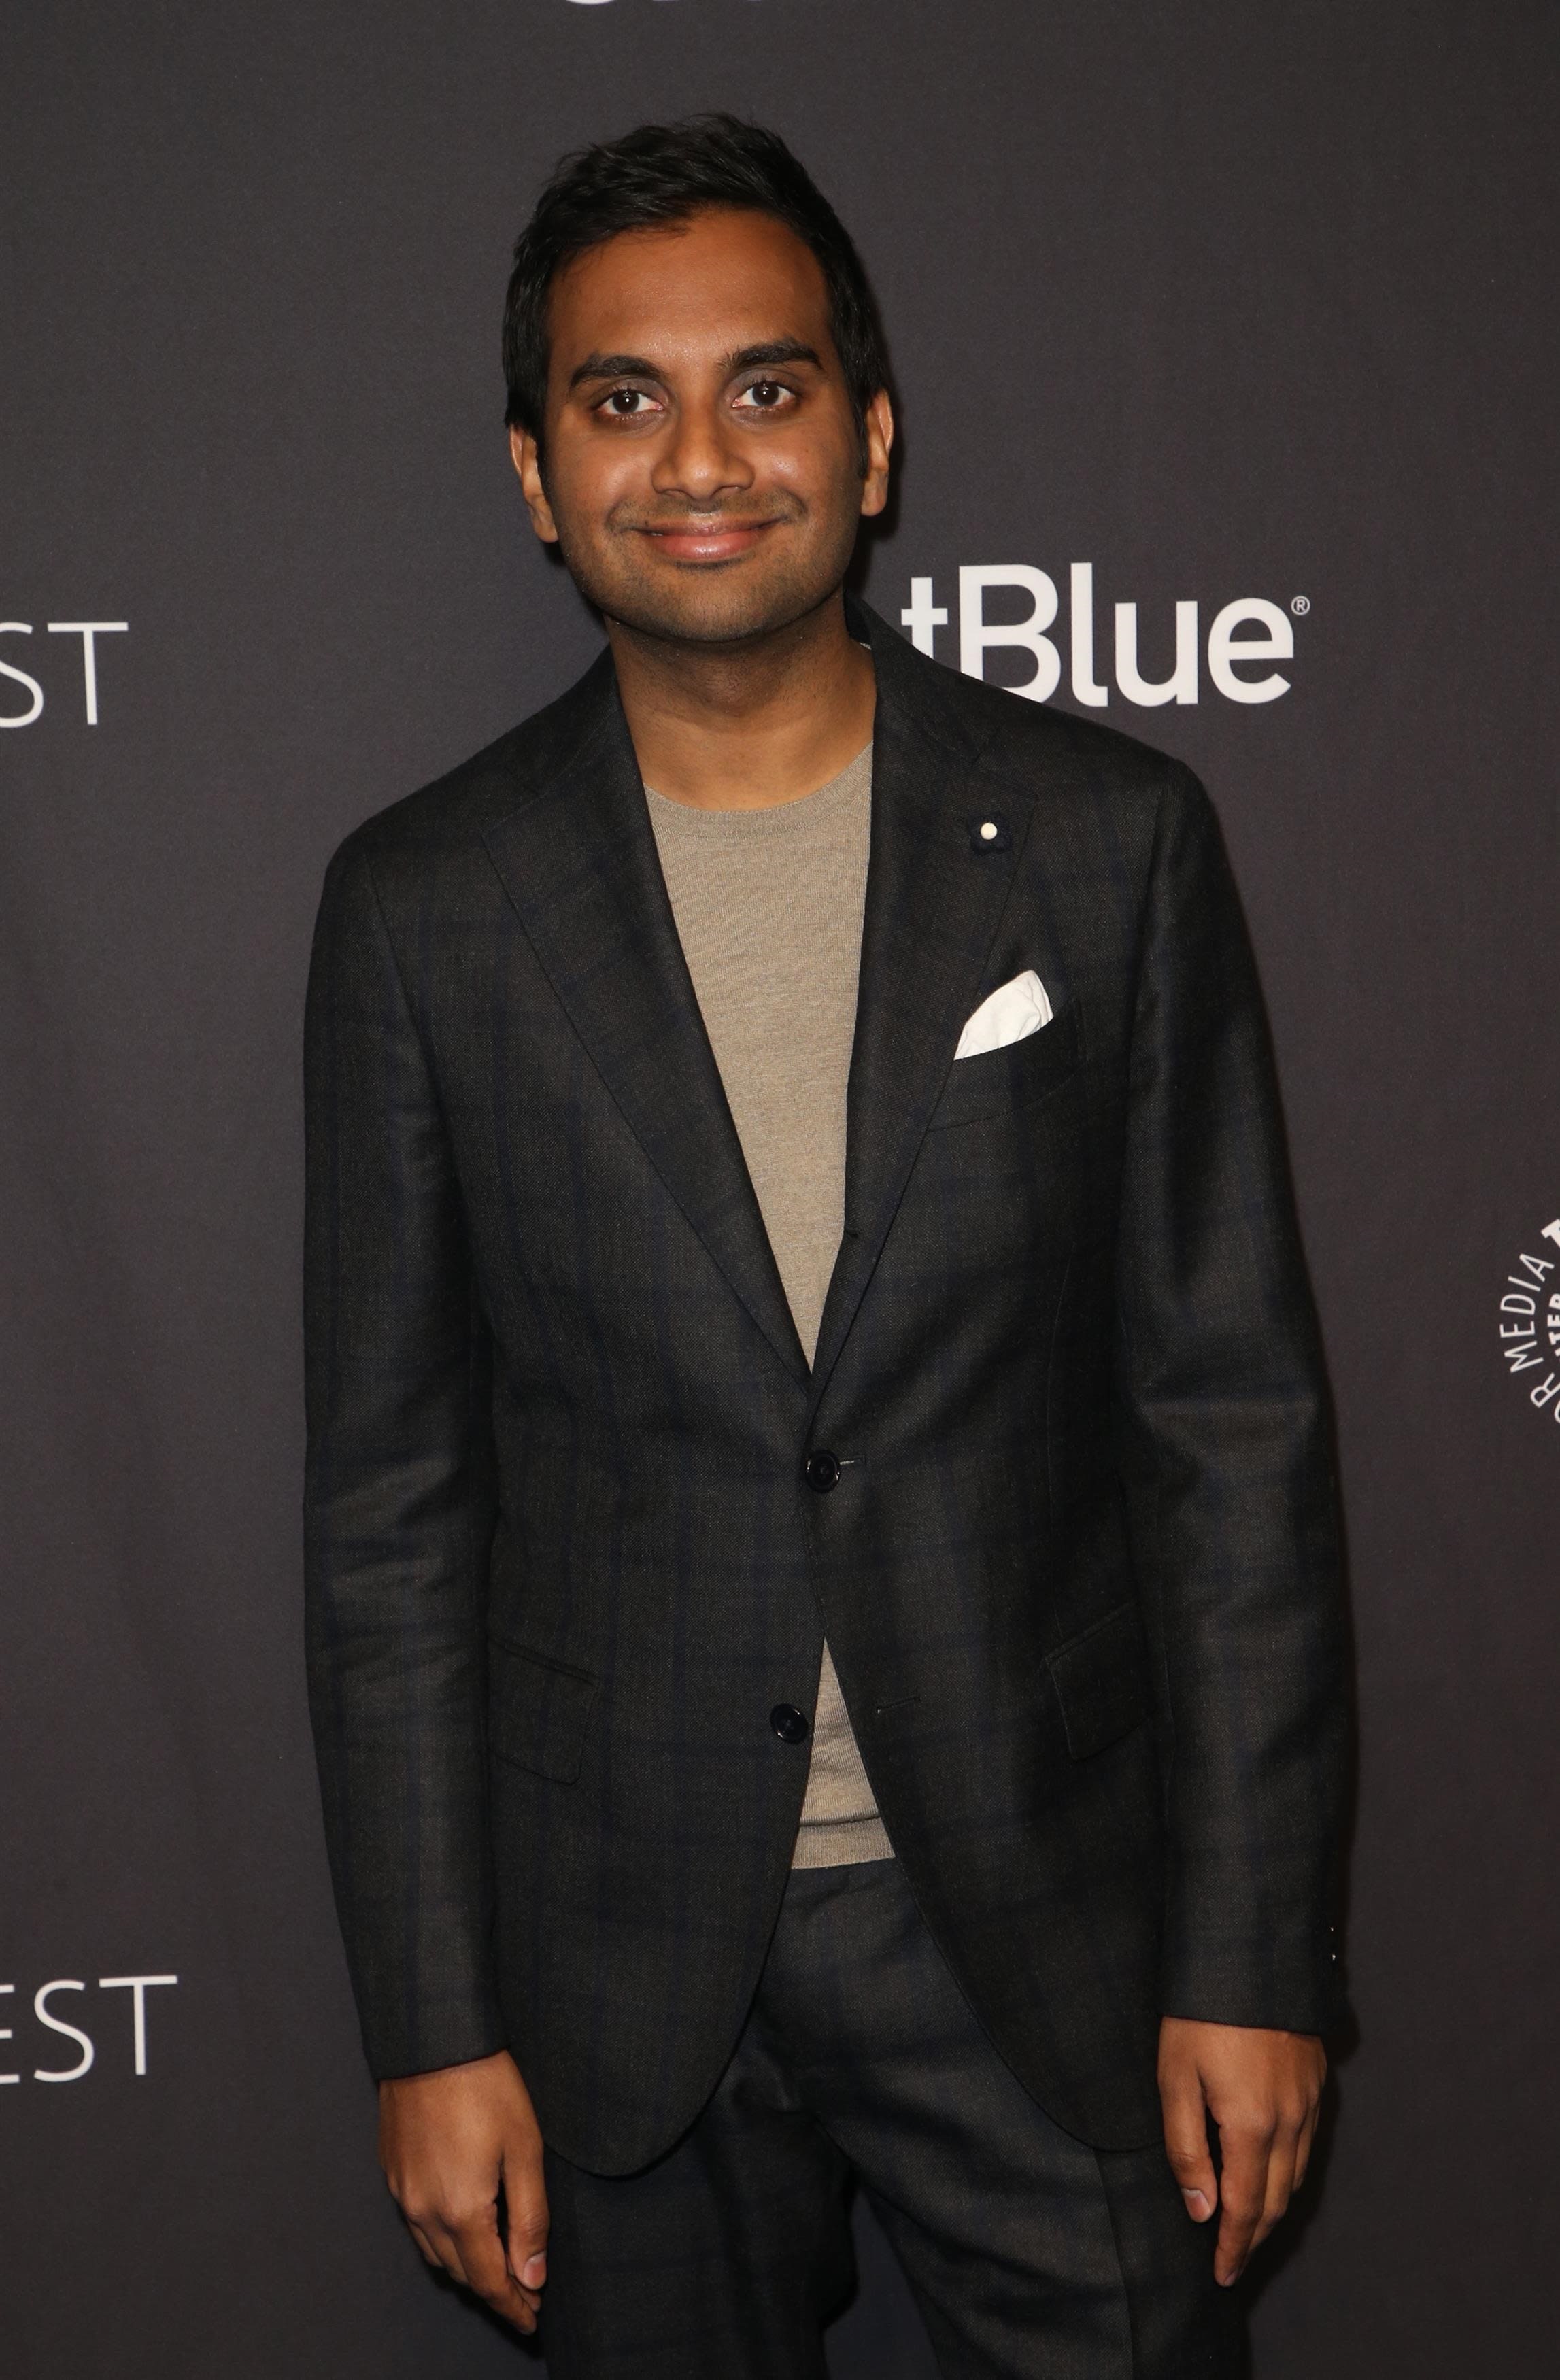 Aziz Ansari Claims He Hasn't Been On The Internet For 4 Years, Says He's On A "Mental Diet"